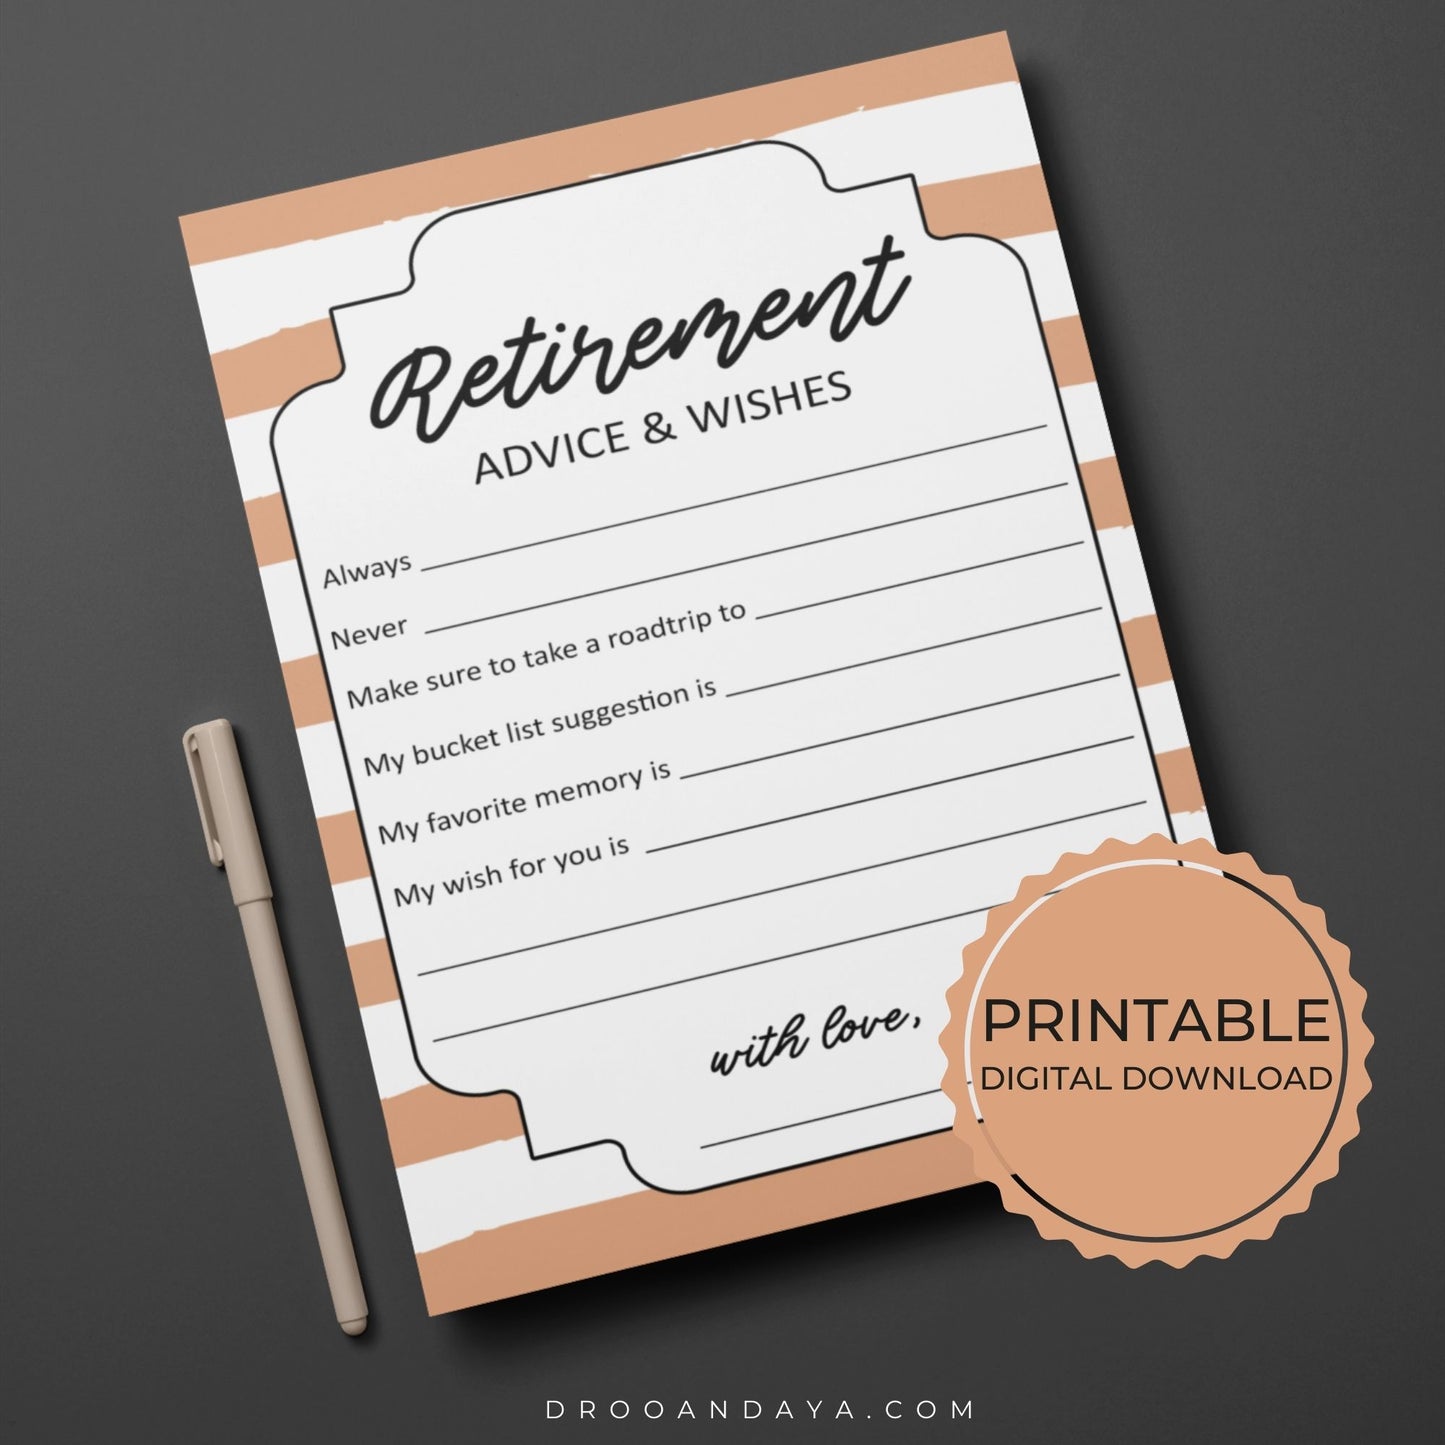 Retirement Advice and Wishes Cards Printable